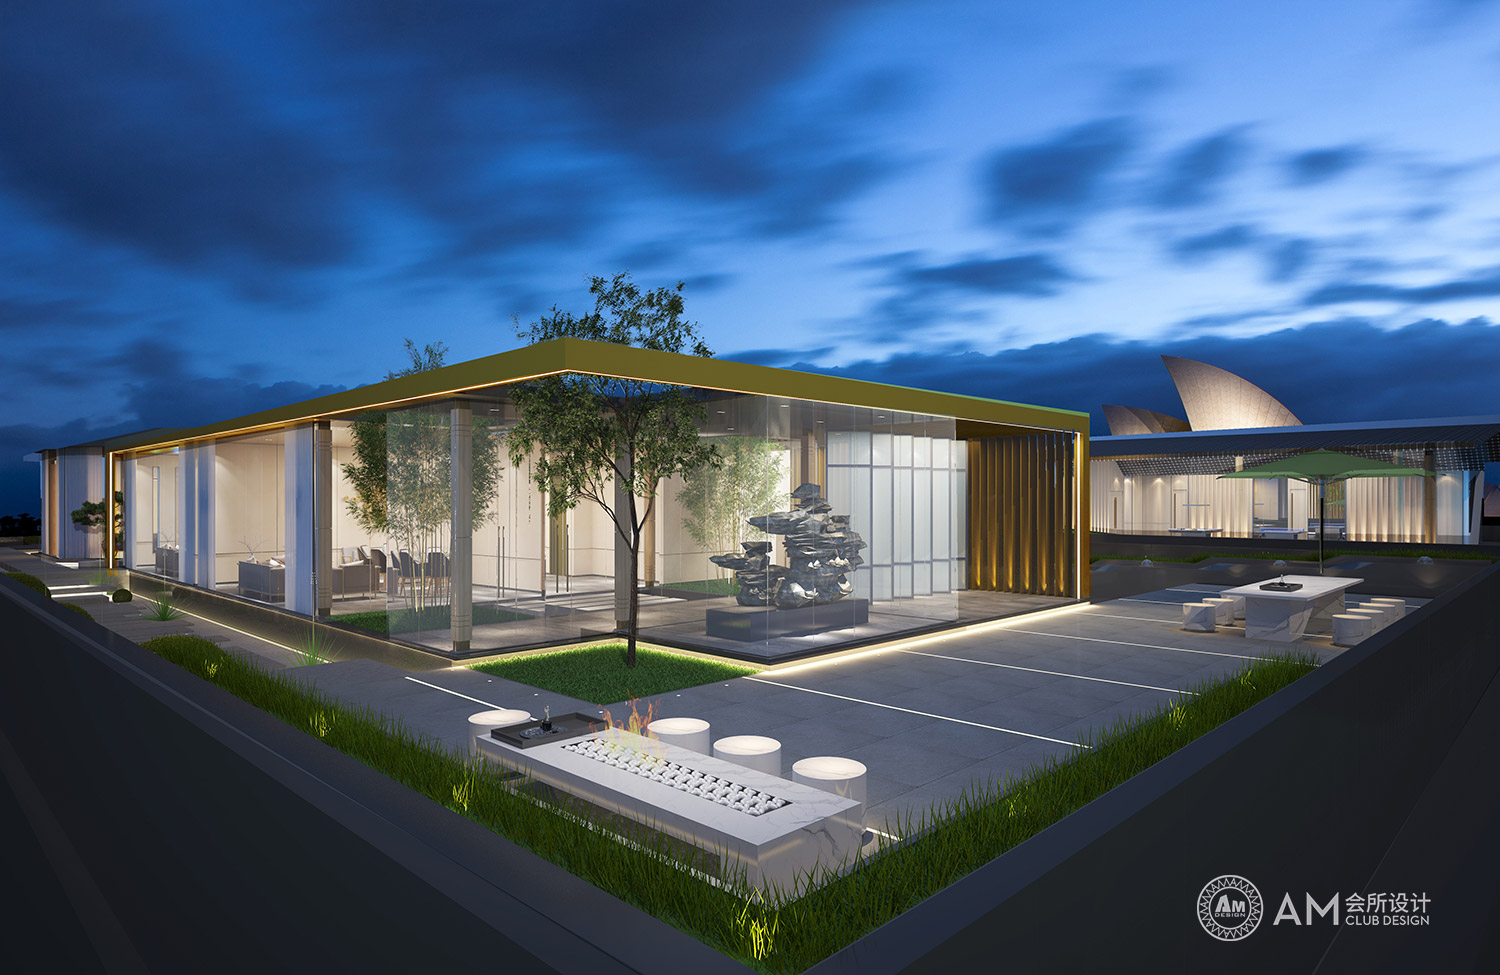 AM DESIGN | Architectural appearance design of enterprise club building in Aobei science and Technology Park